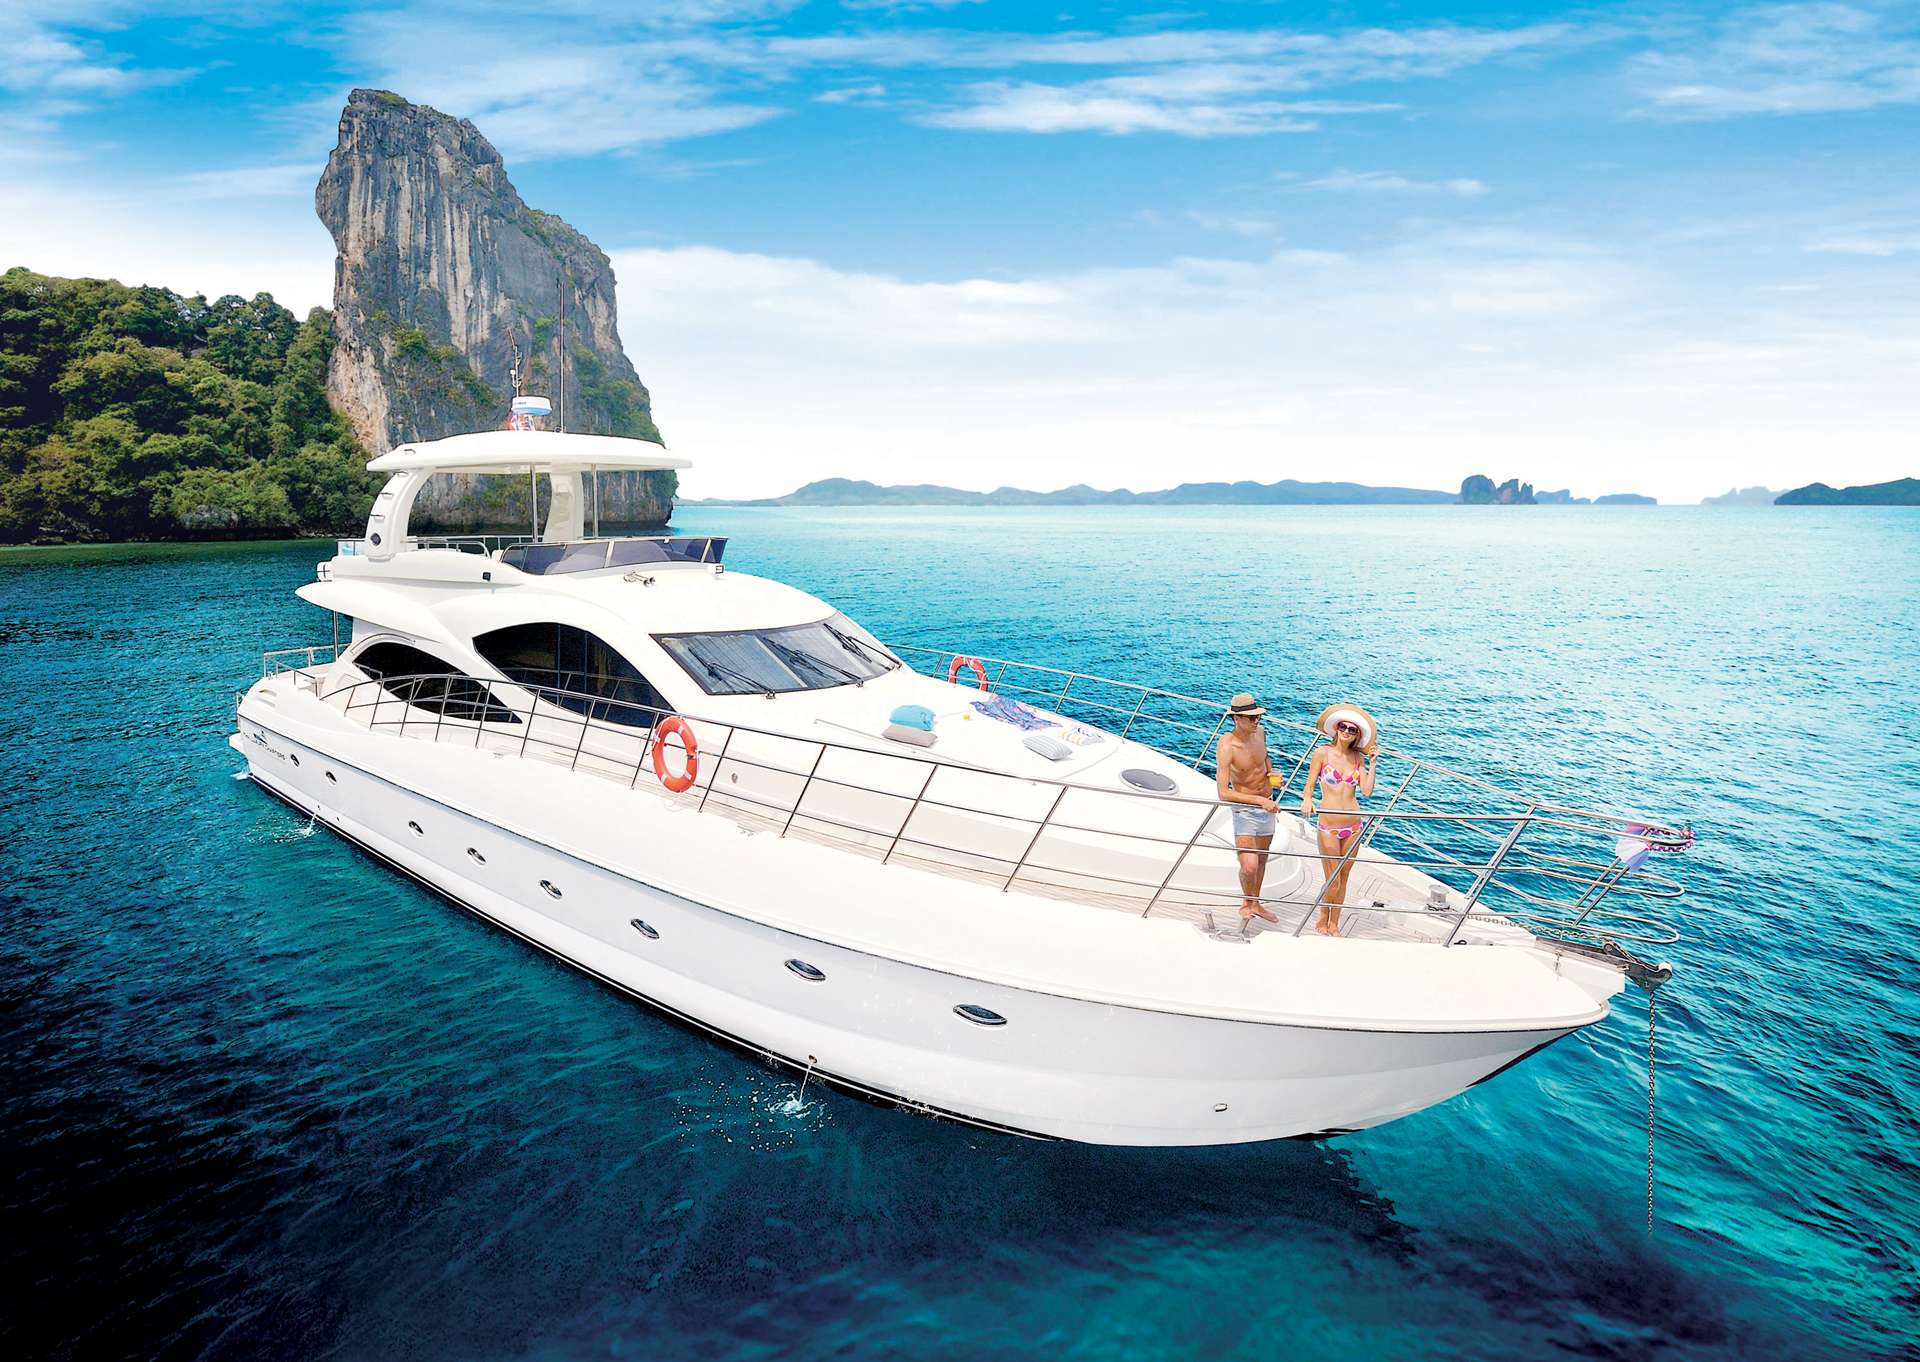 lady kathryn - Yacht Charter Malaysia & Boat hire in SE Asia 1